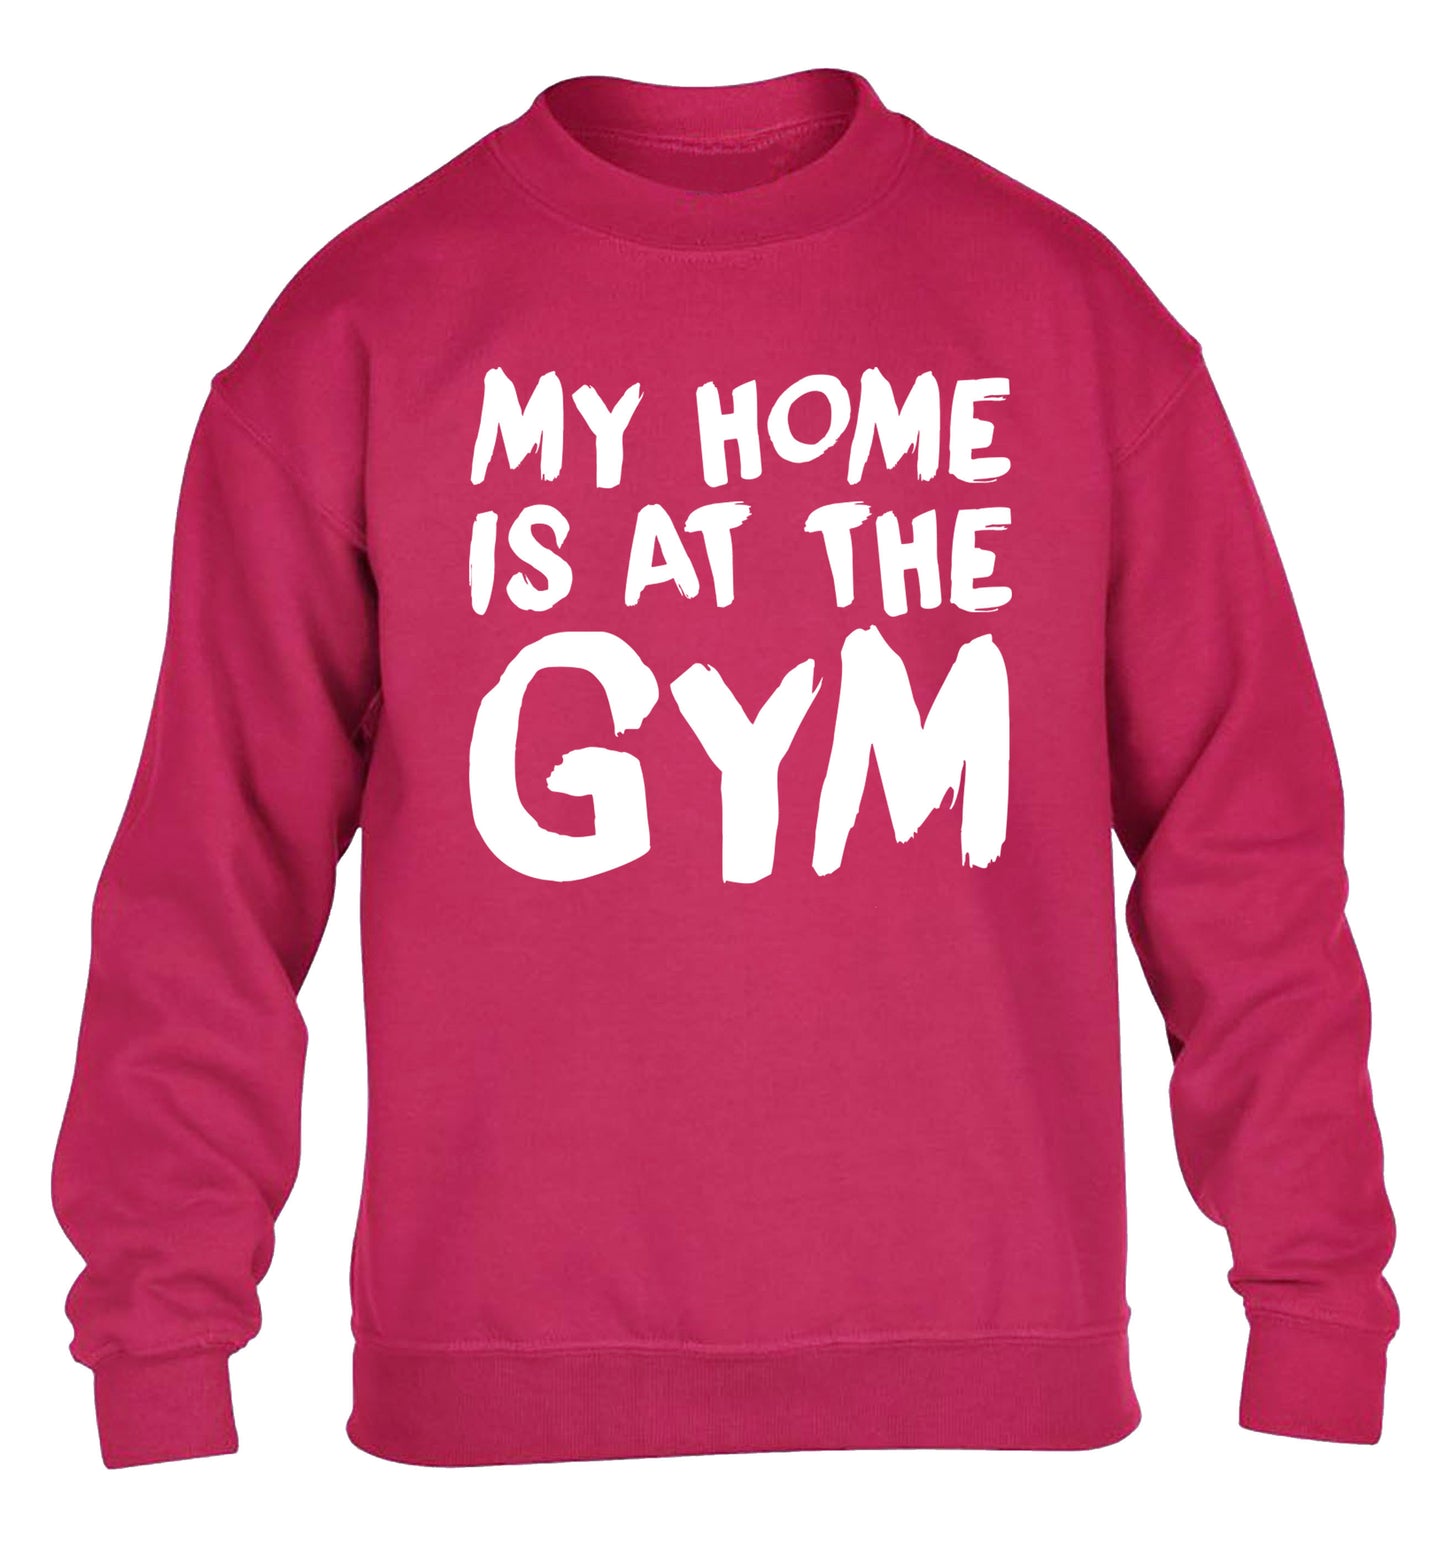 My home is at the gym children's pink sweater 12-14 Years